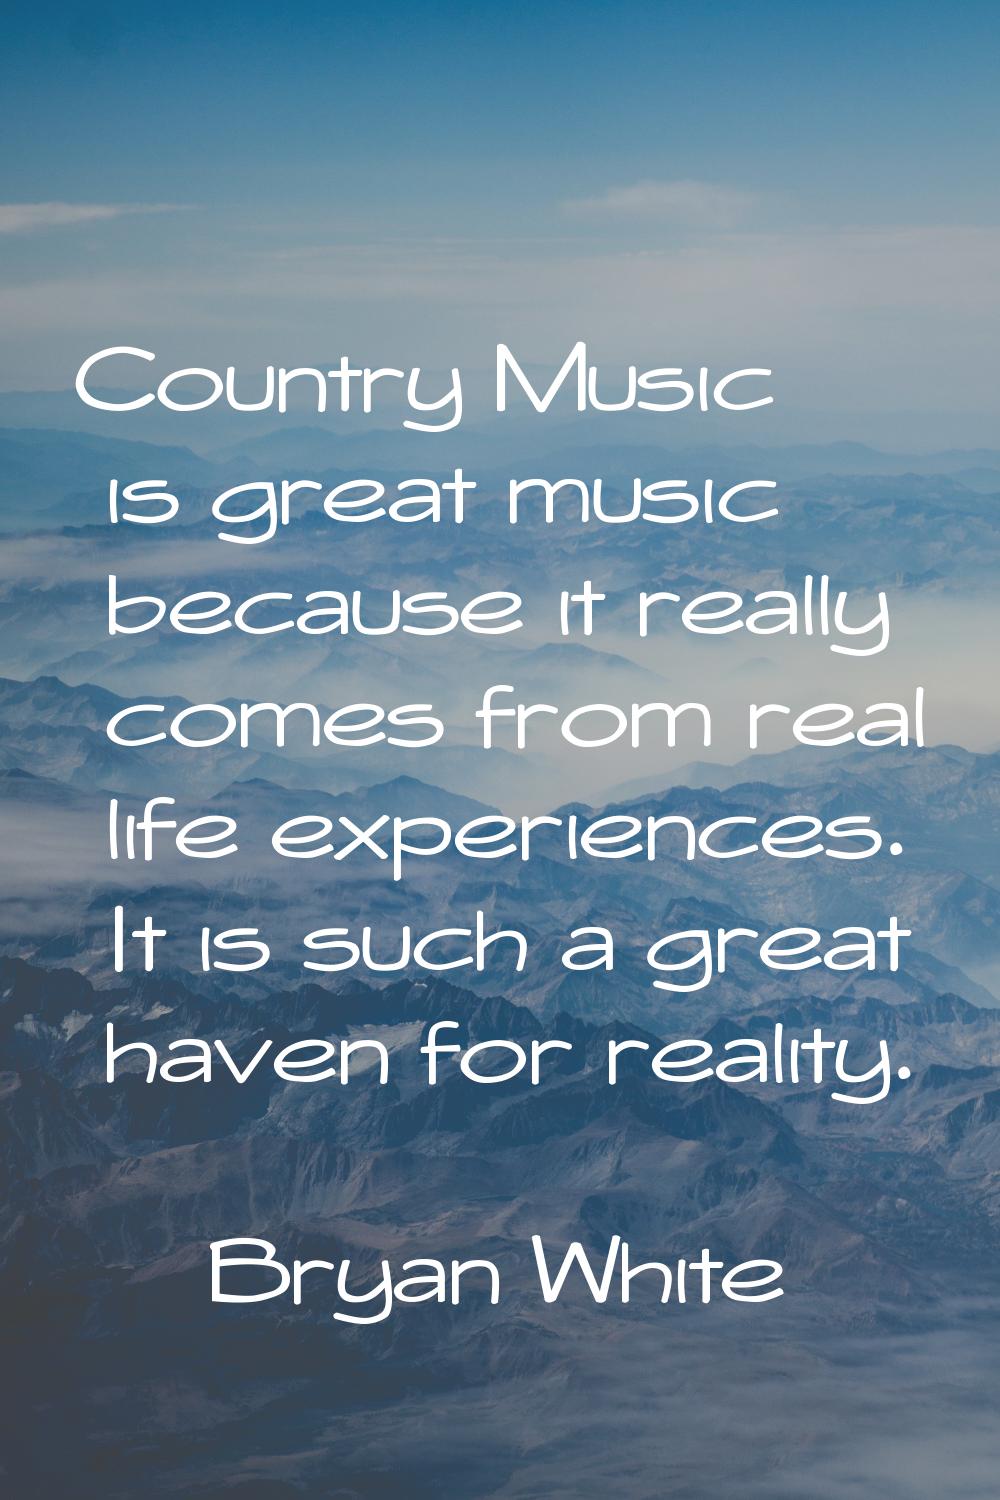 Country Music is great music because it really comes from real life experiences. It is such a great